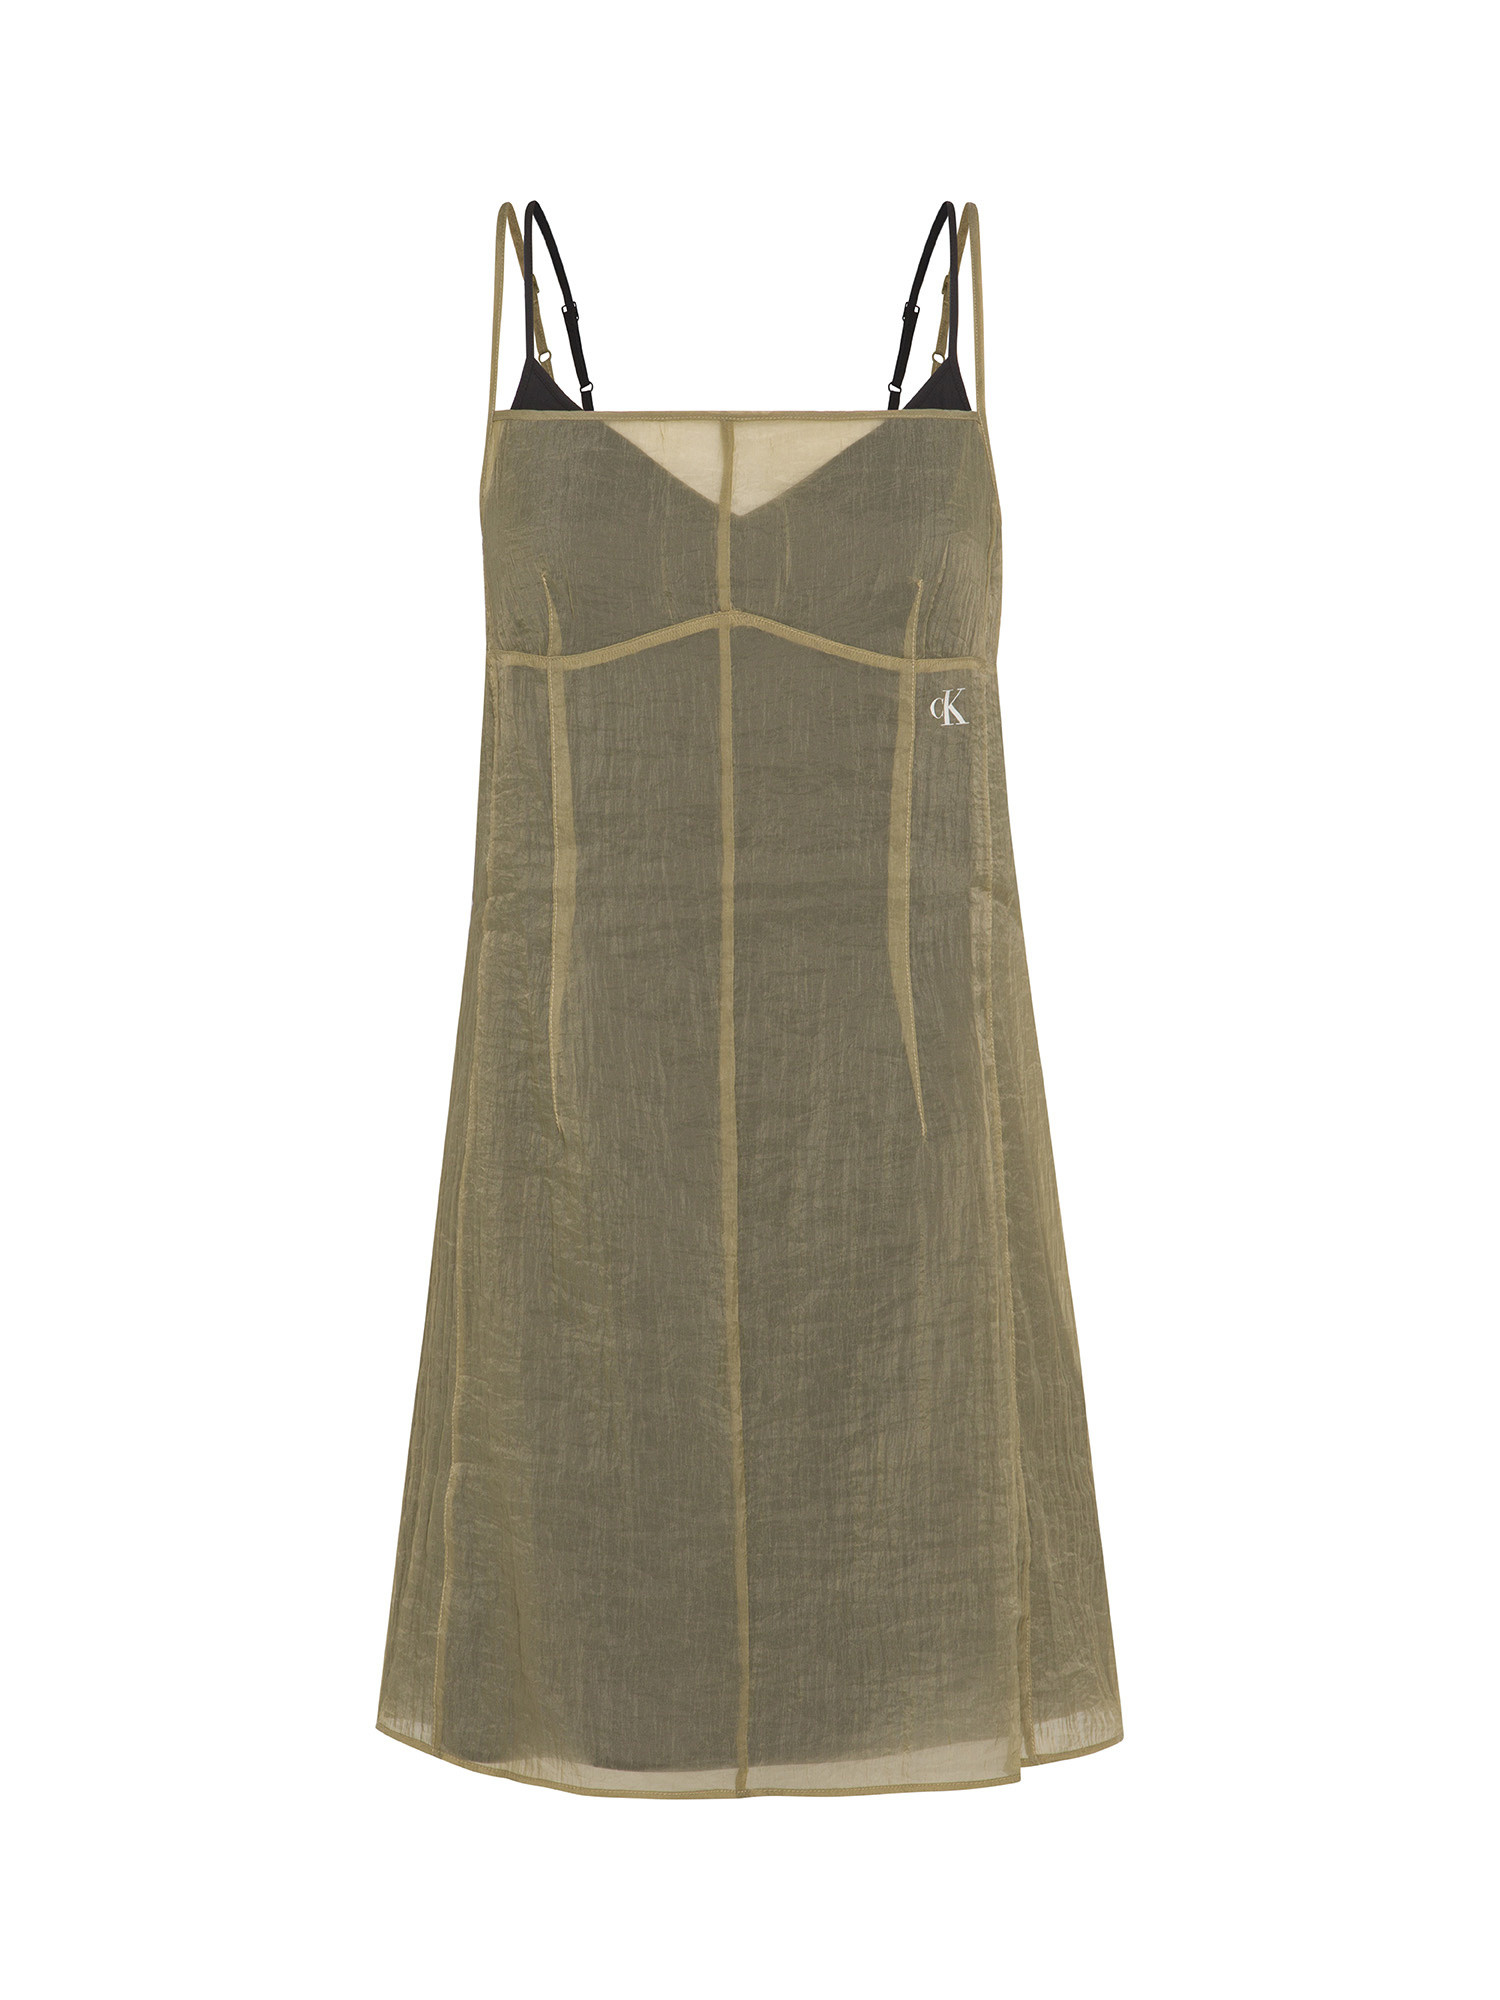 Slip dress doubled in chiffon, Beige, large image number 0